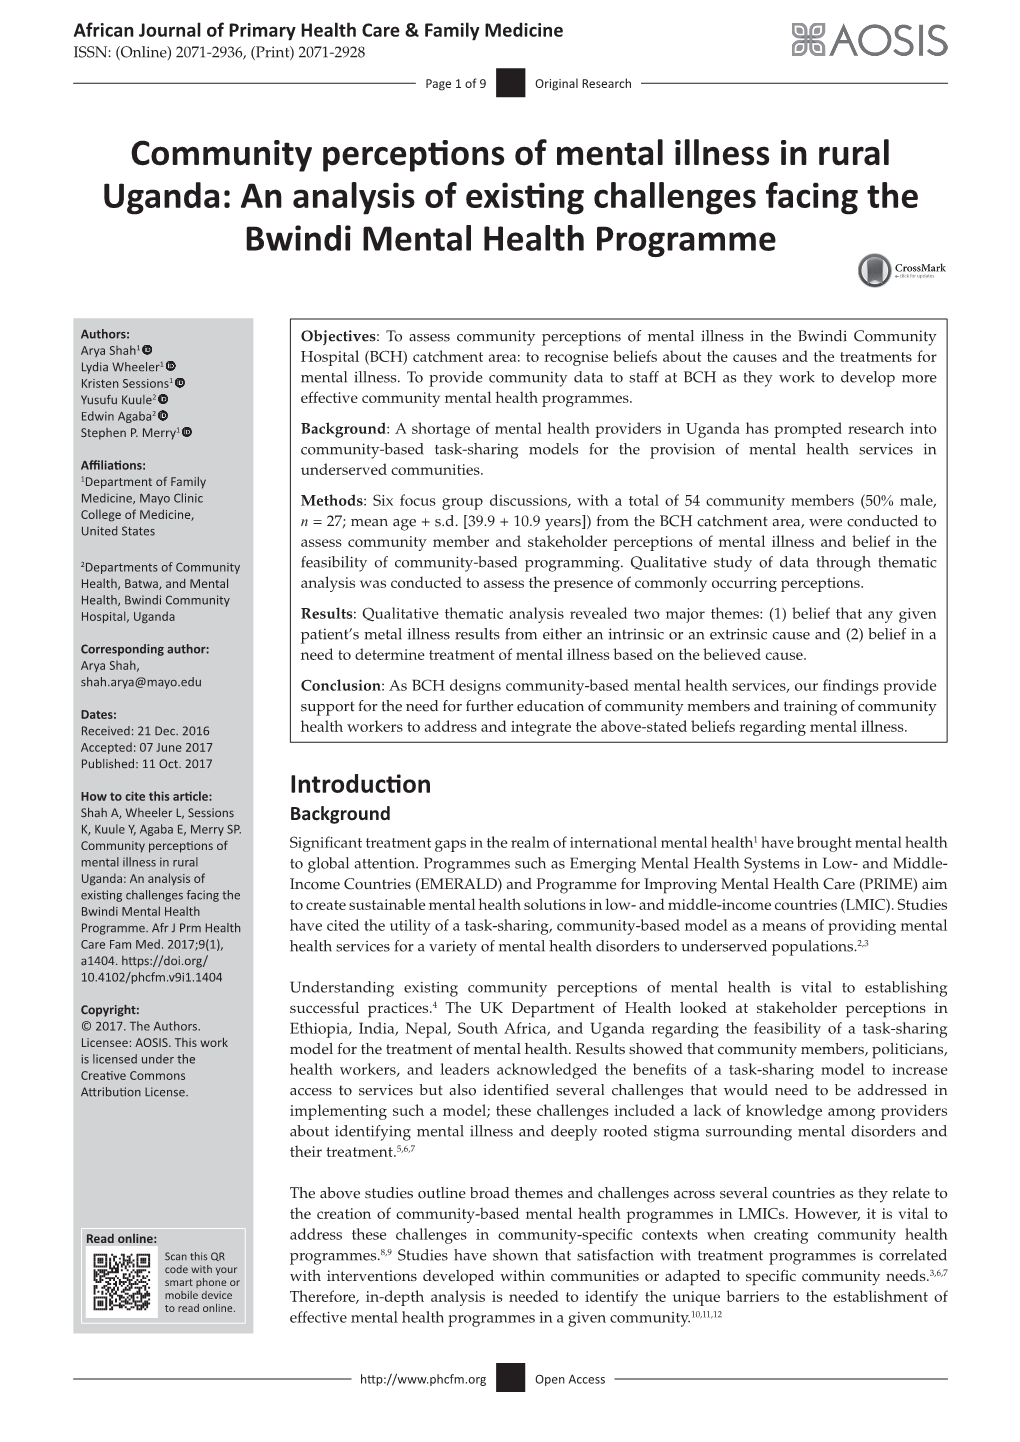 Community Perceptions of Mental Illness in Rural Uganda: an Analysis of Existing Challenges Facing the Bwindi Mental Health Programme